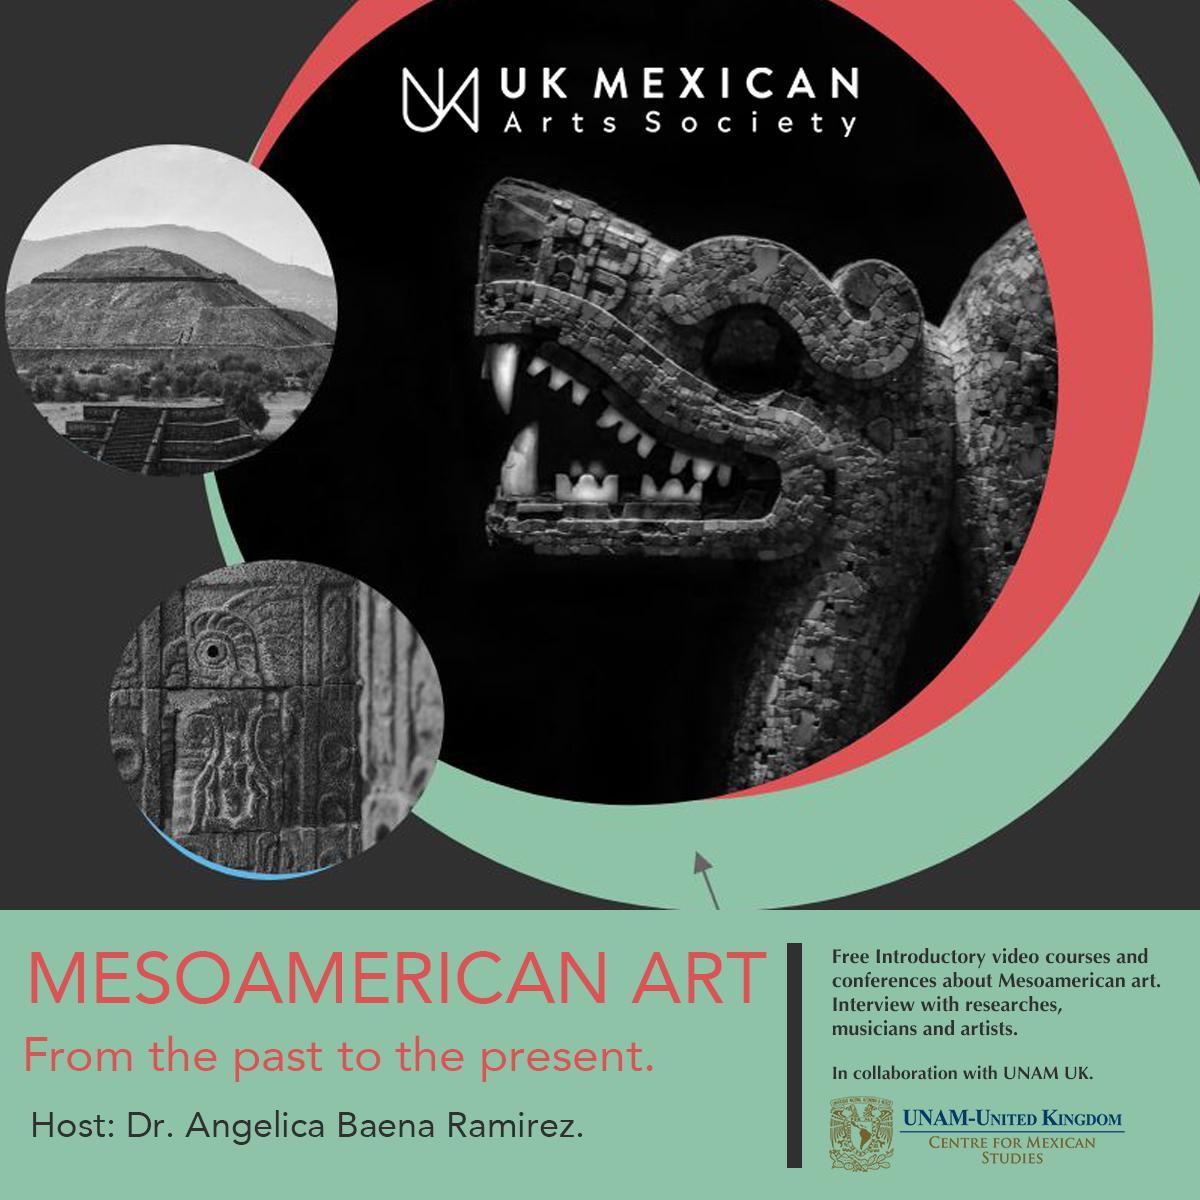 Mesoamerican Art From the past to the present